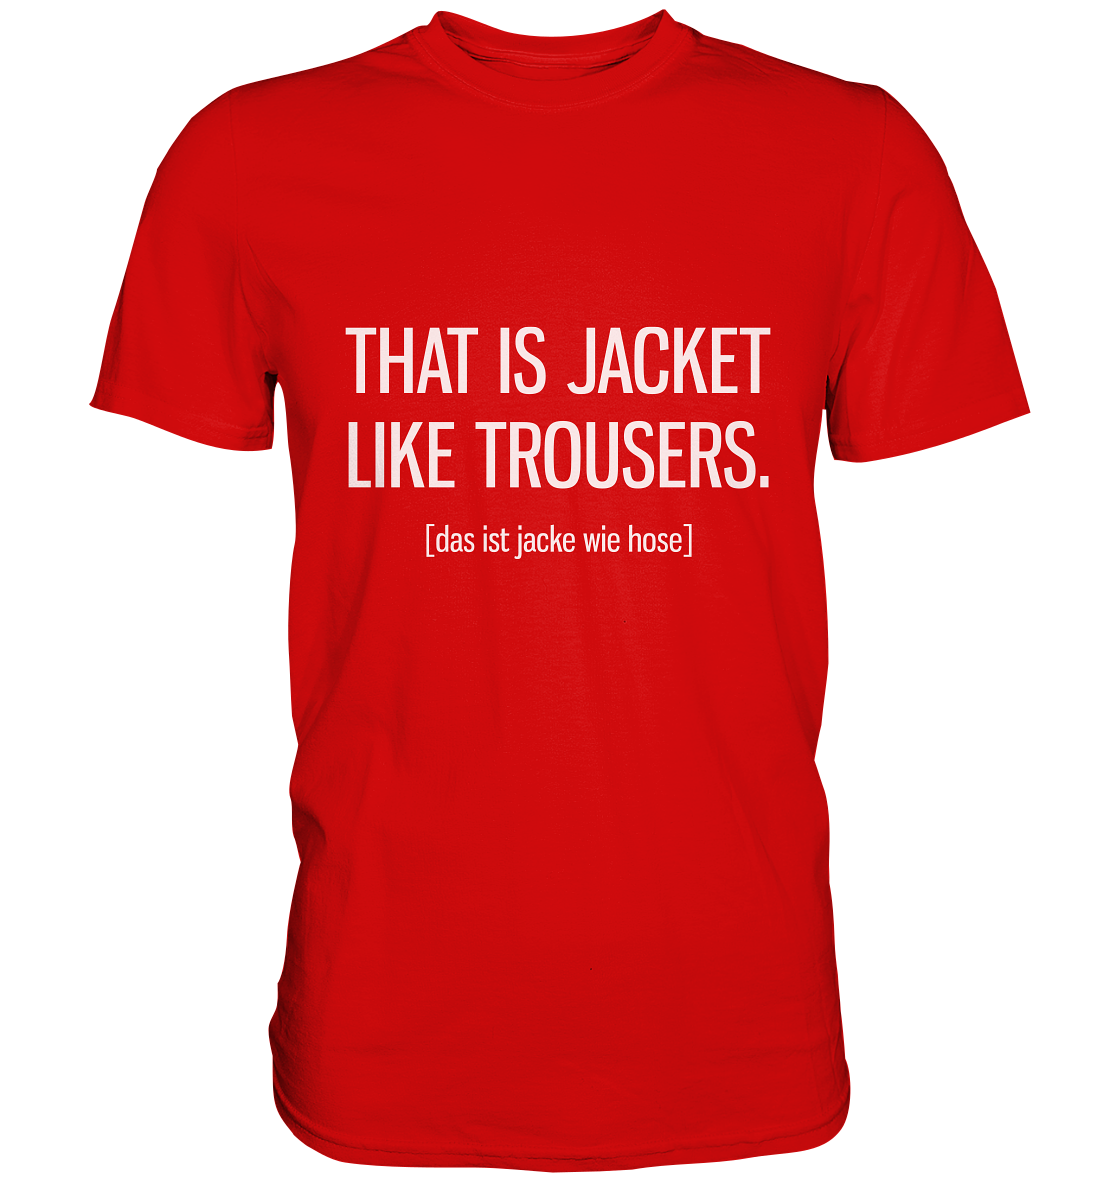 That is jacket like trousers. Englisch - Unisex Premium Shirt